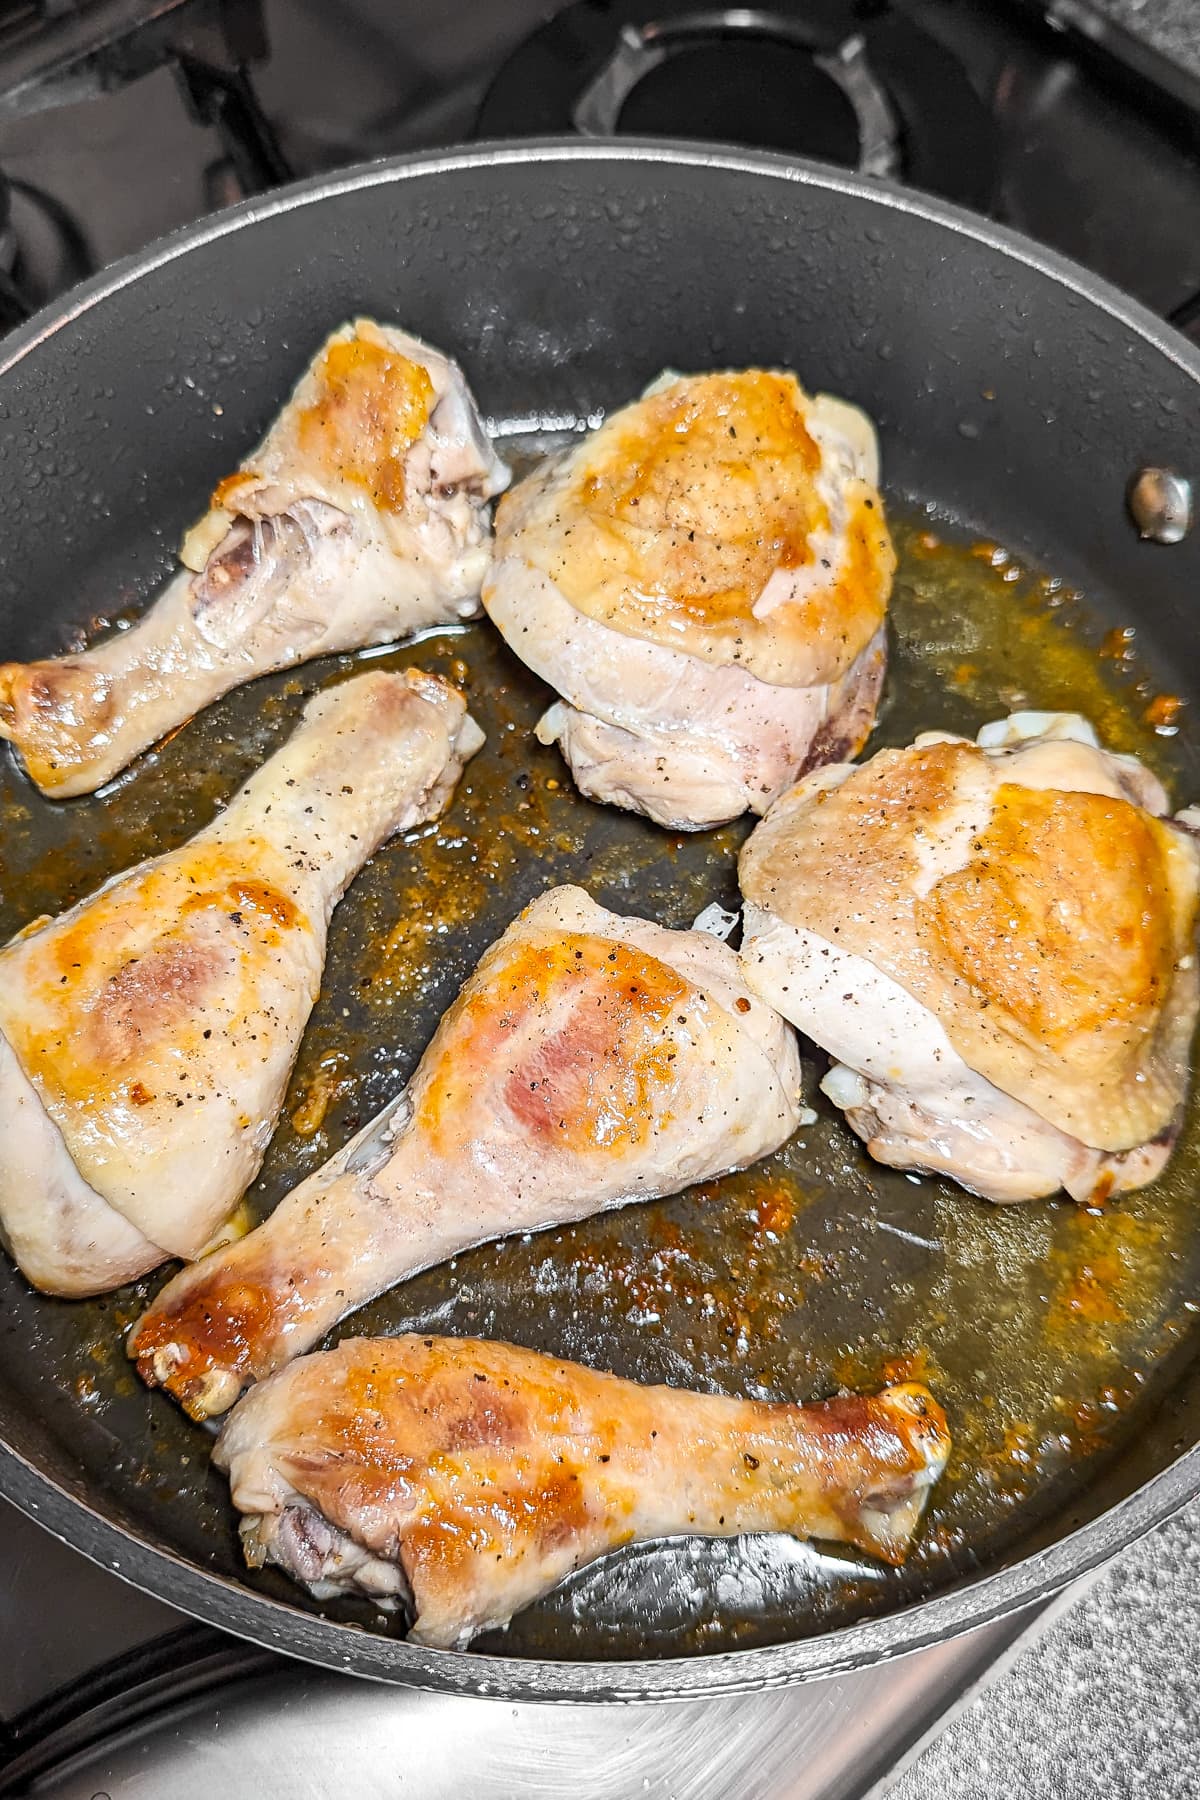 Sauce pan with fried chicken thighs and drumsticks.